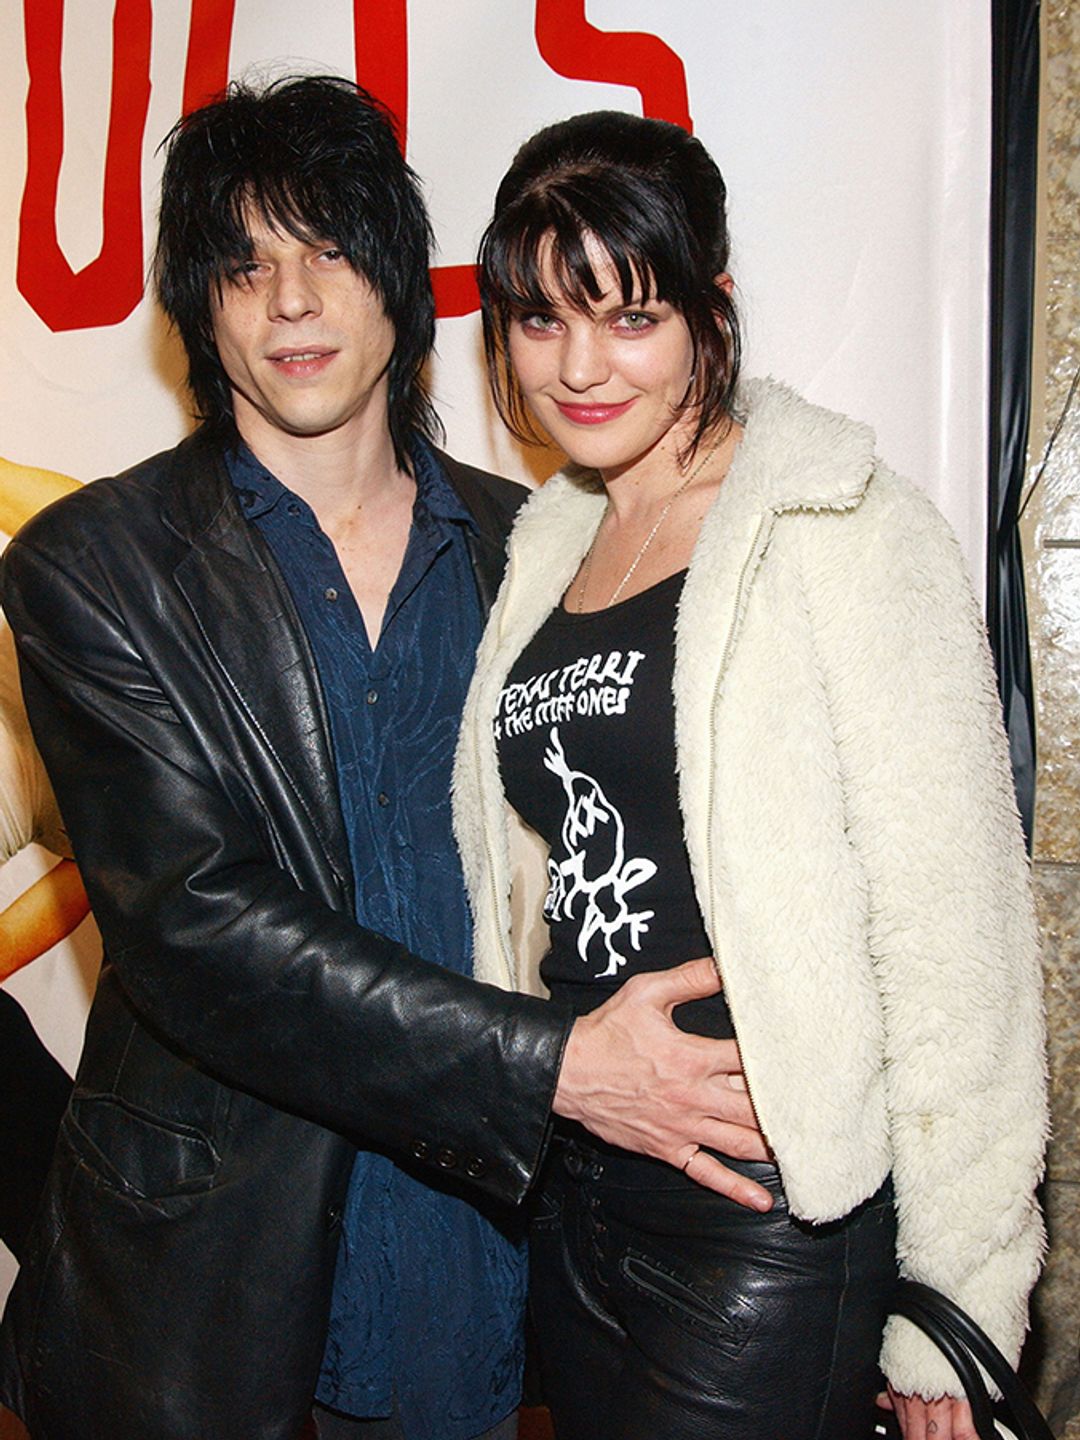 Pauley Perrette and musician Coyote Shivers